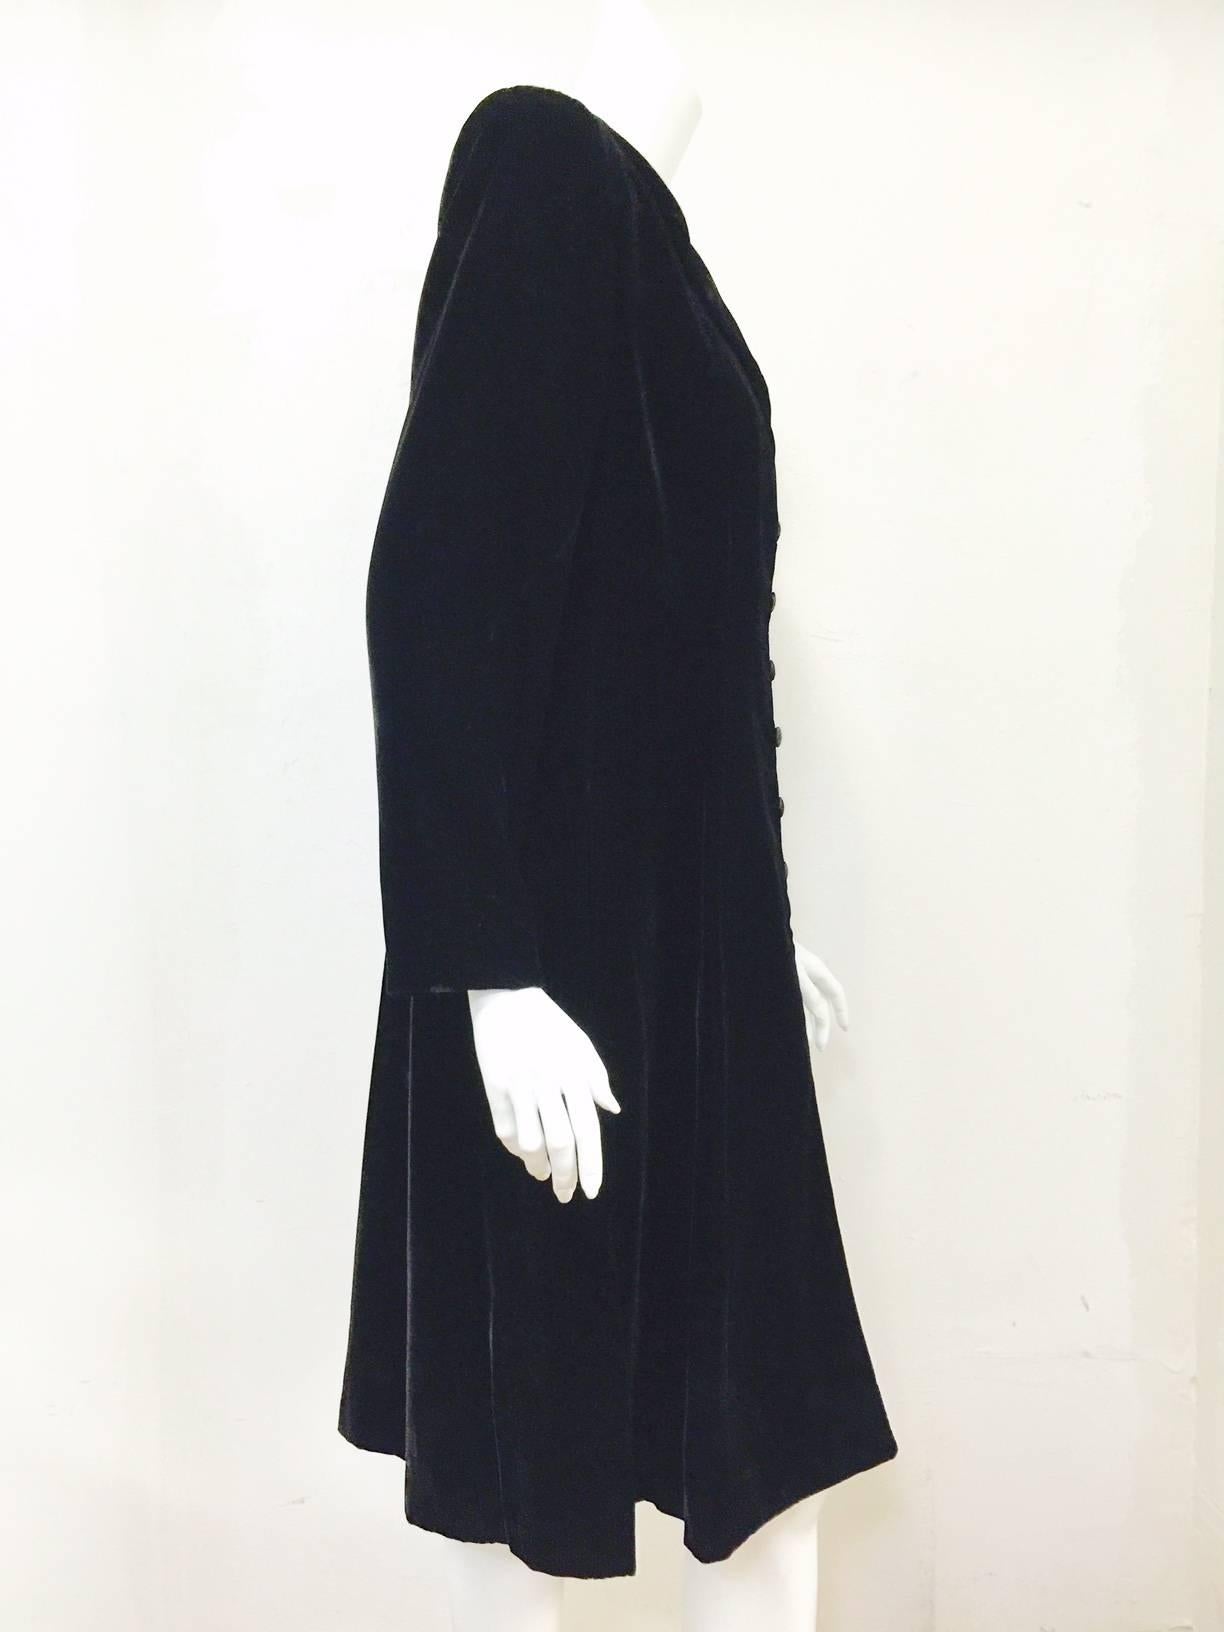 Velvet Evening Coat shows why Giorgio Armani is widely recognized as one of the most influential designers of the last 40 years.  Features fine Italian fabric and craftsmanship.  Coat may is the perfect complement to long skirts, slacks, or stands